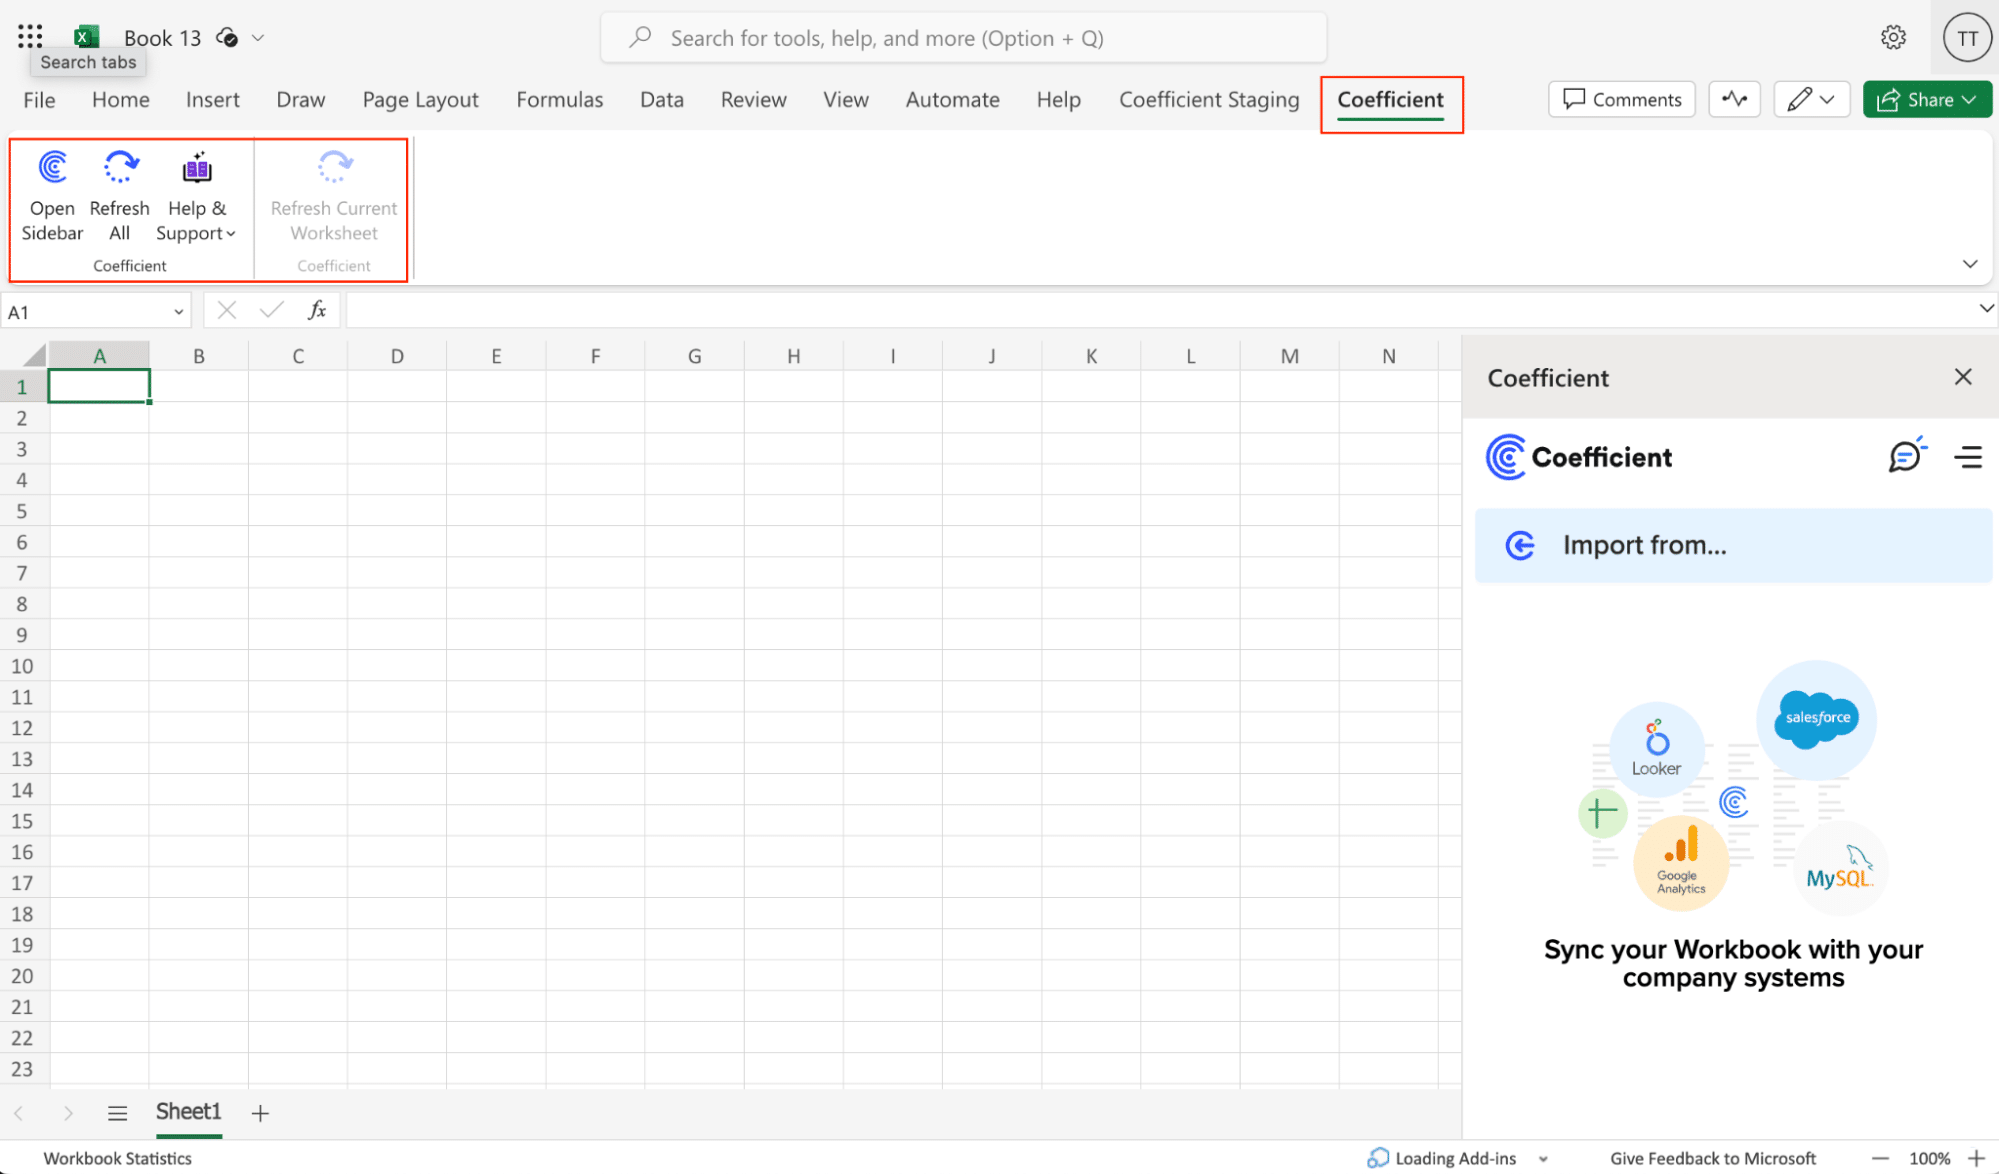 Coefficient tab visible on Excel's top navigation bar after successful installation.